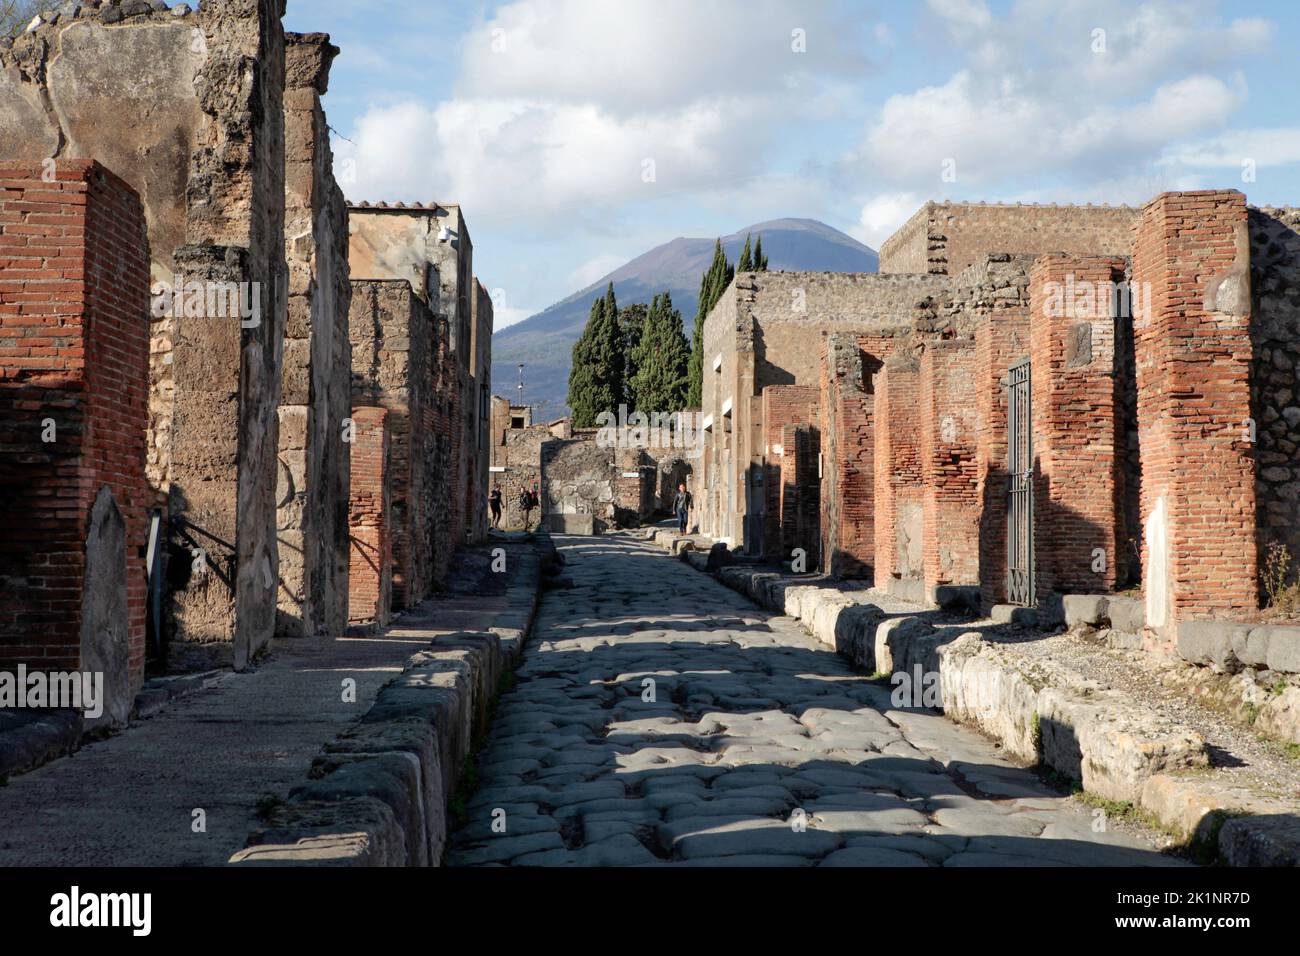 Mount Vesuvius looms over the archaeological park / town of Pompeii, a UNESCO World Heritage Site, Naples, Italy Stock Photo